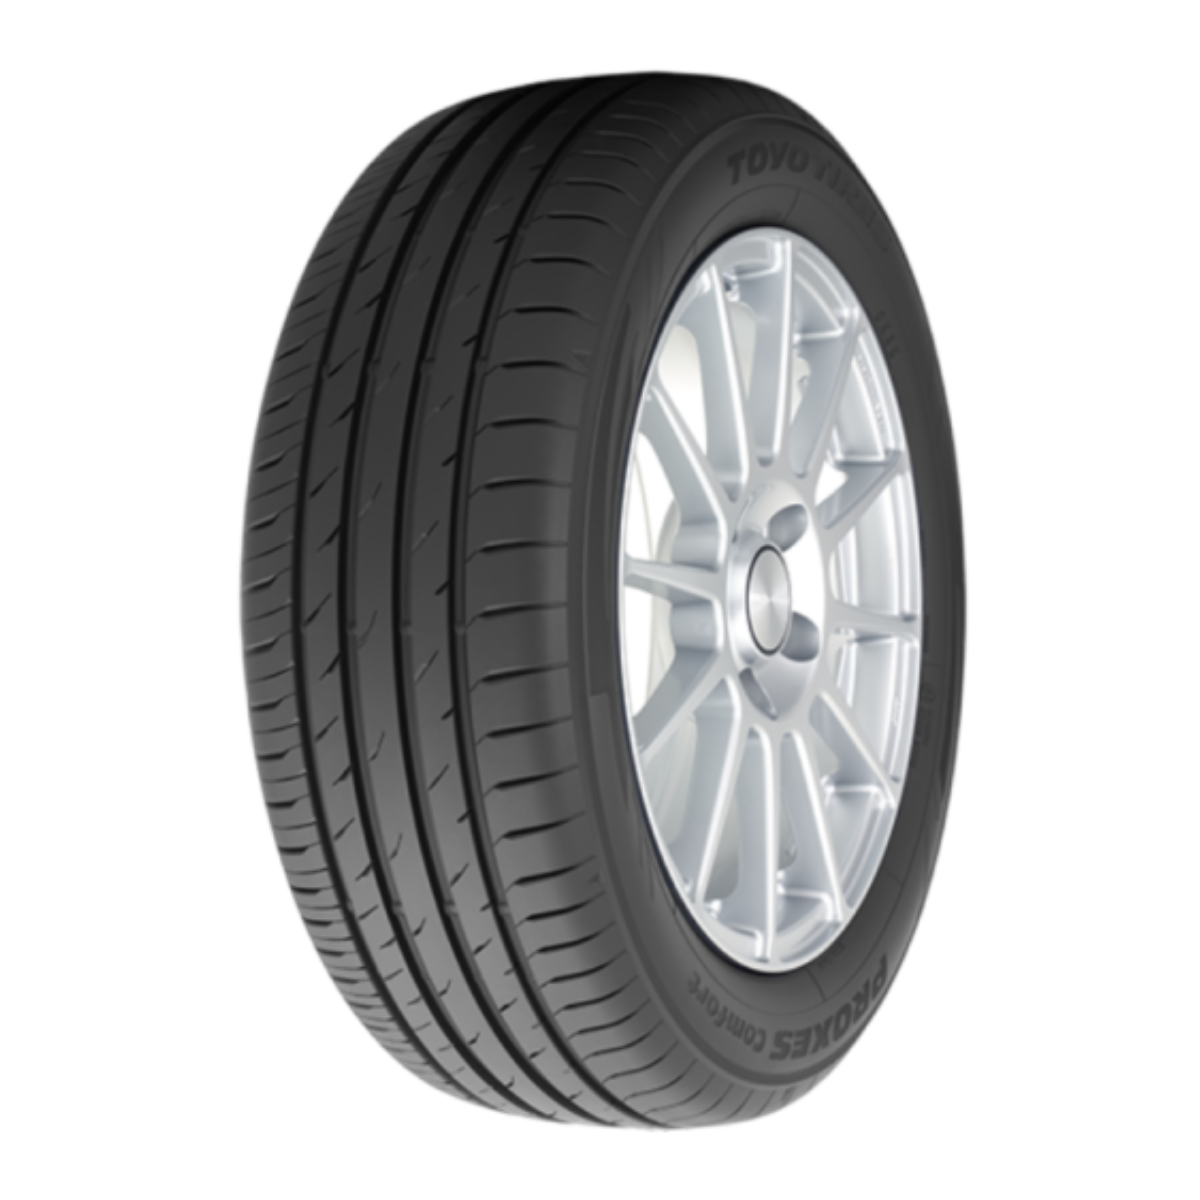 185/55/R15 Toyo Proxes Comfort 82H